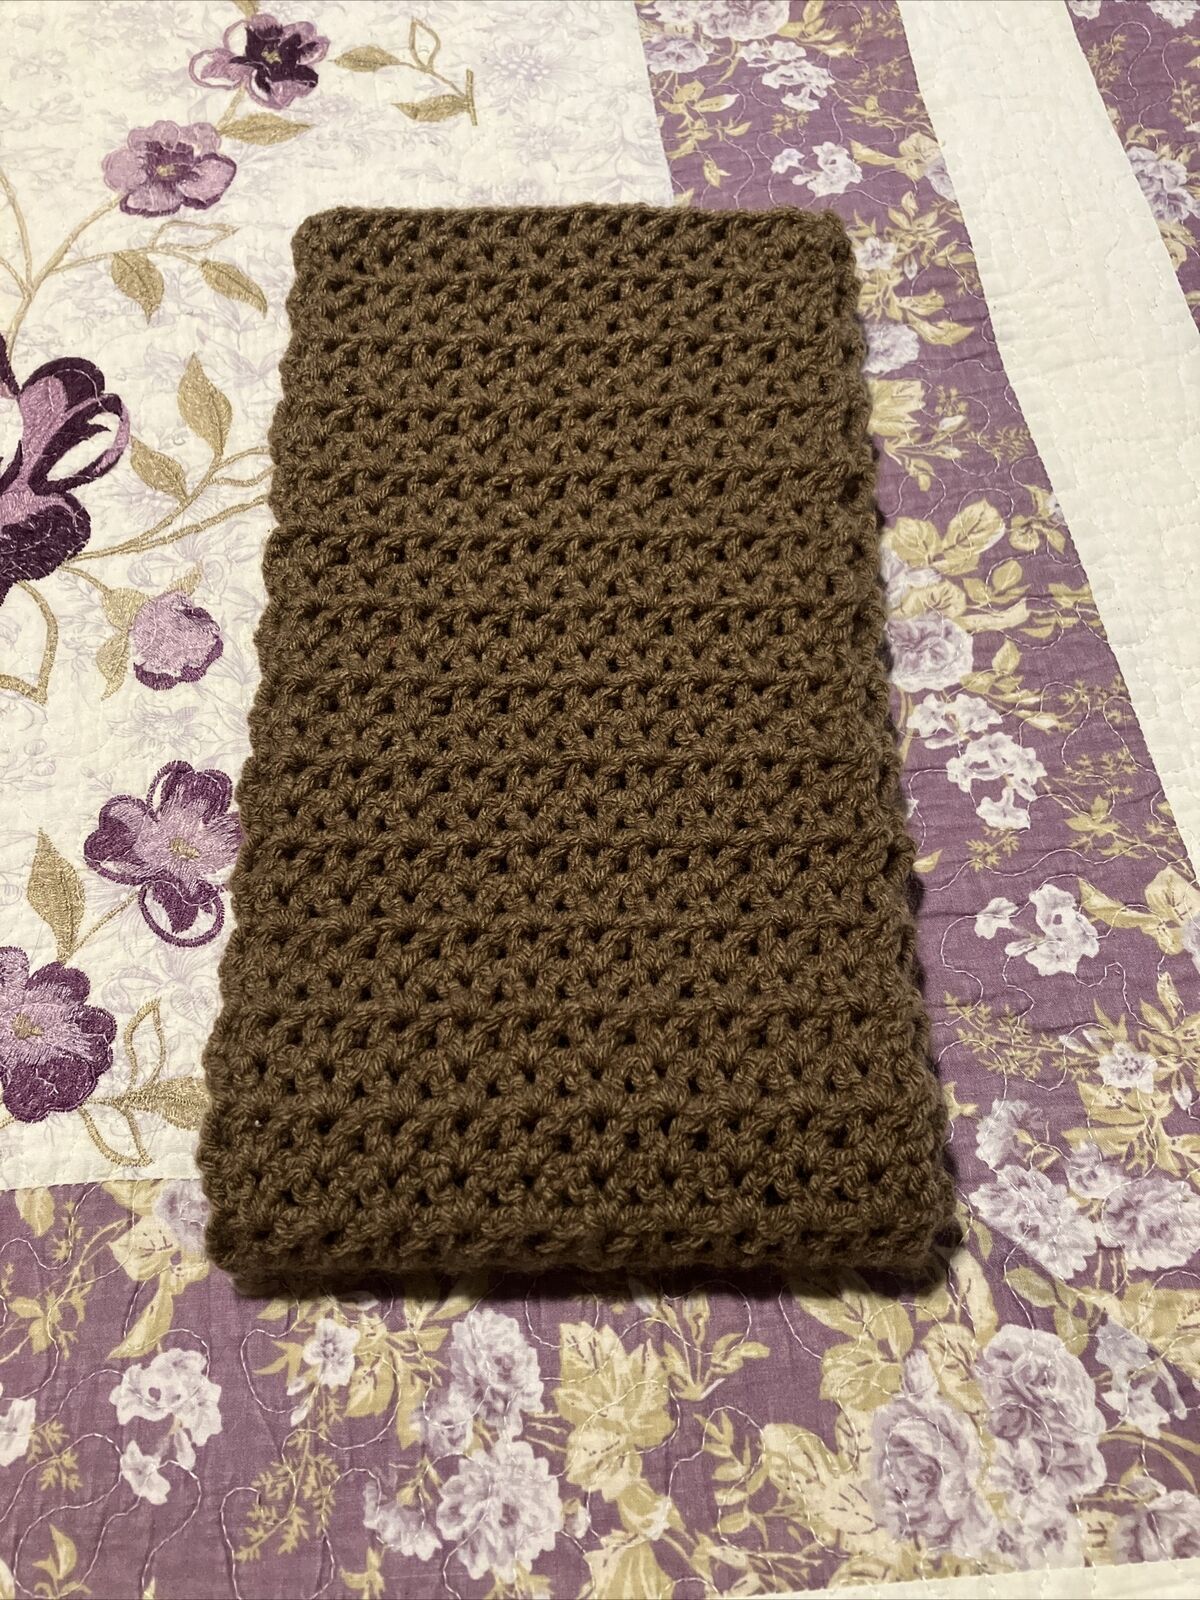 Handmade Crochet Scarf Cafe Latte Brown Colors 7 Inches Wide 54 Inches Length